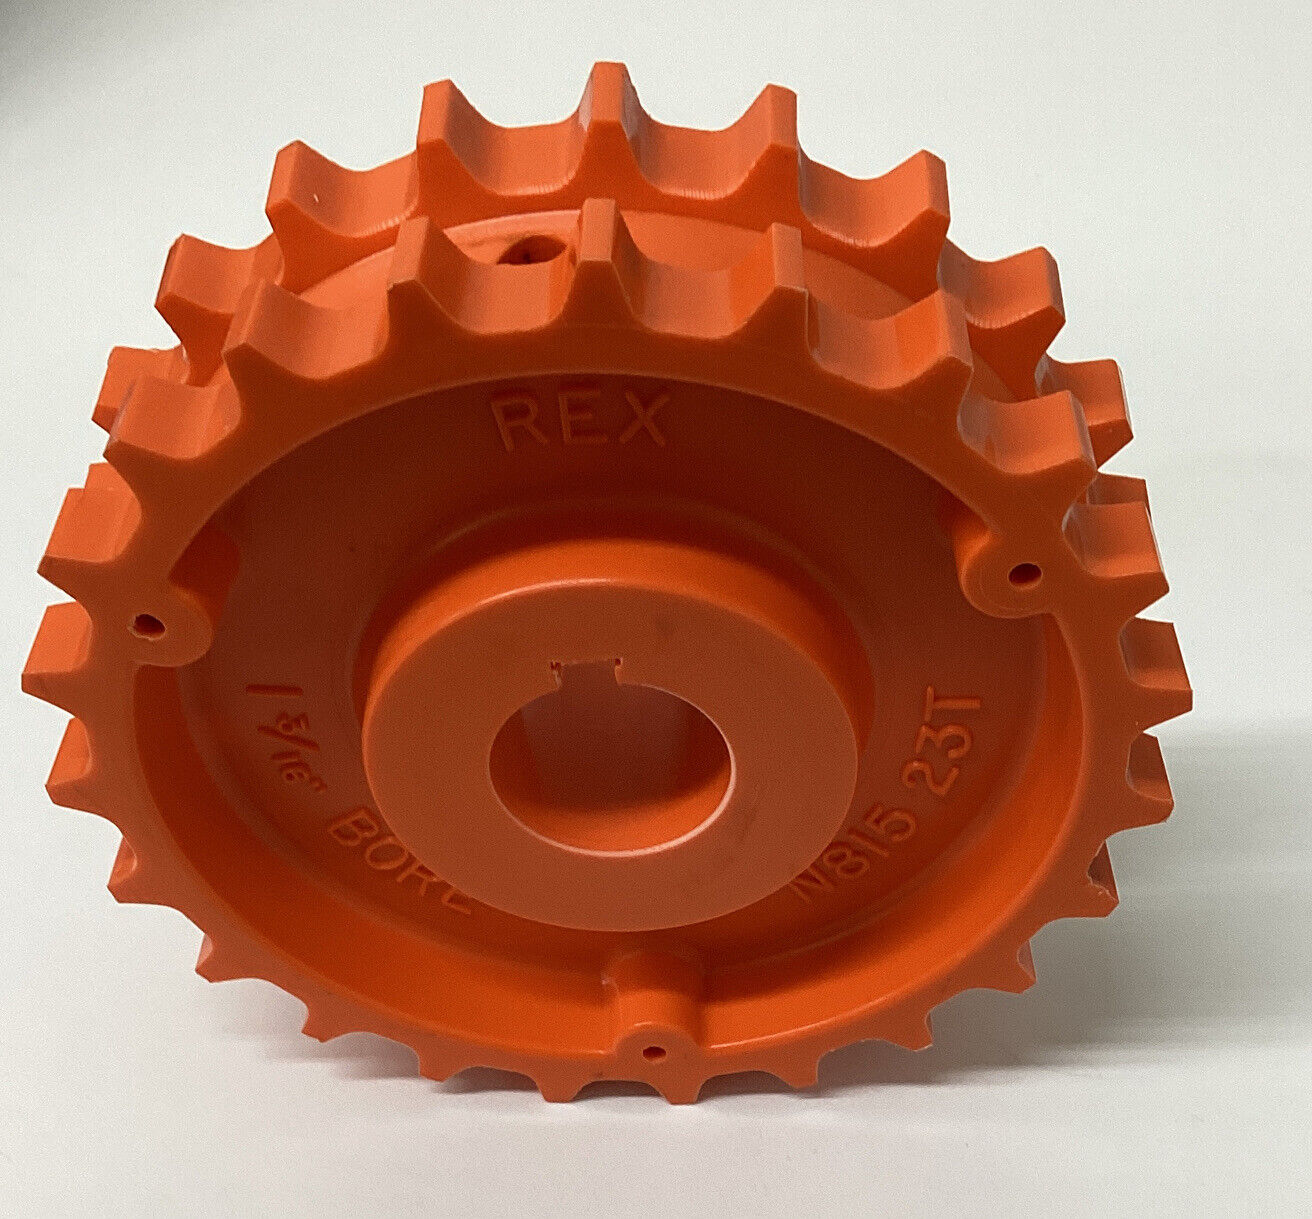 Rexnord  N815-23T  Solid Bore  Double Row Sprocket  1-3/16'' Bore  (BK130)